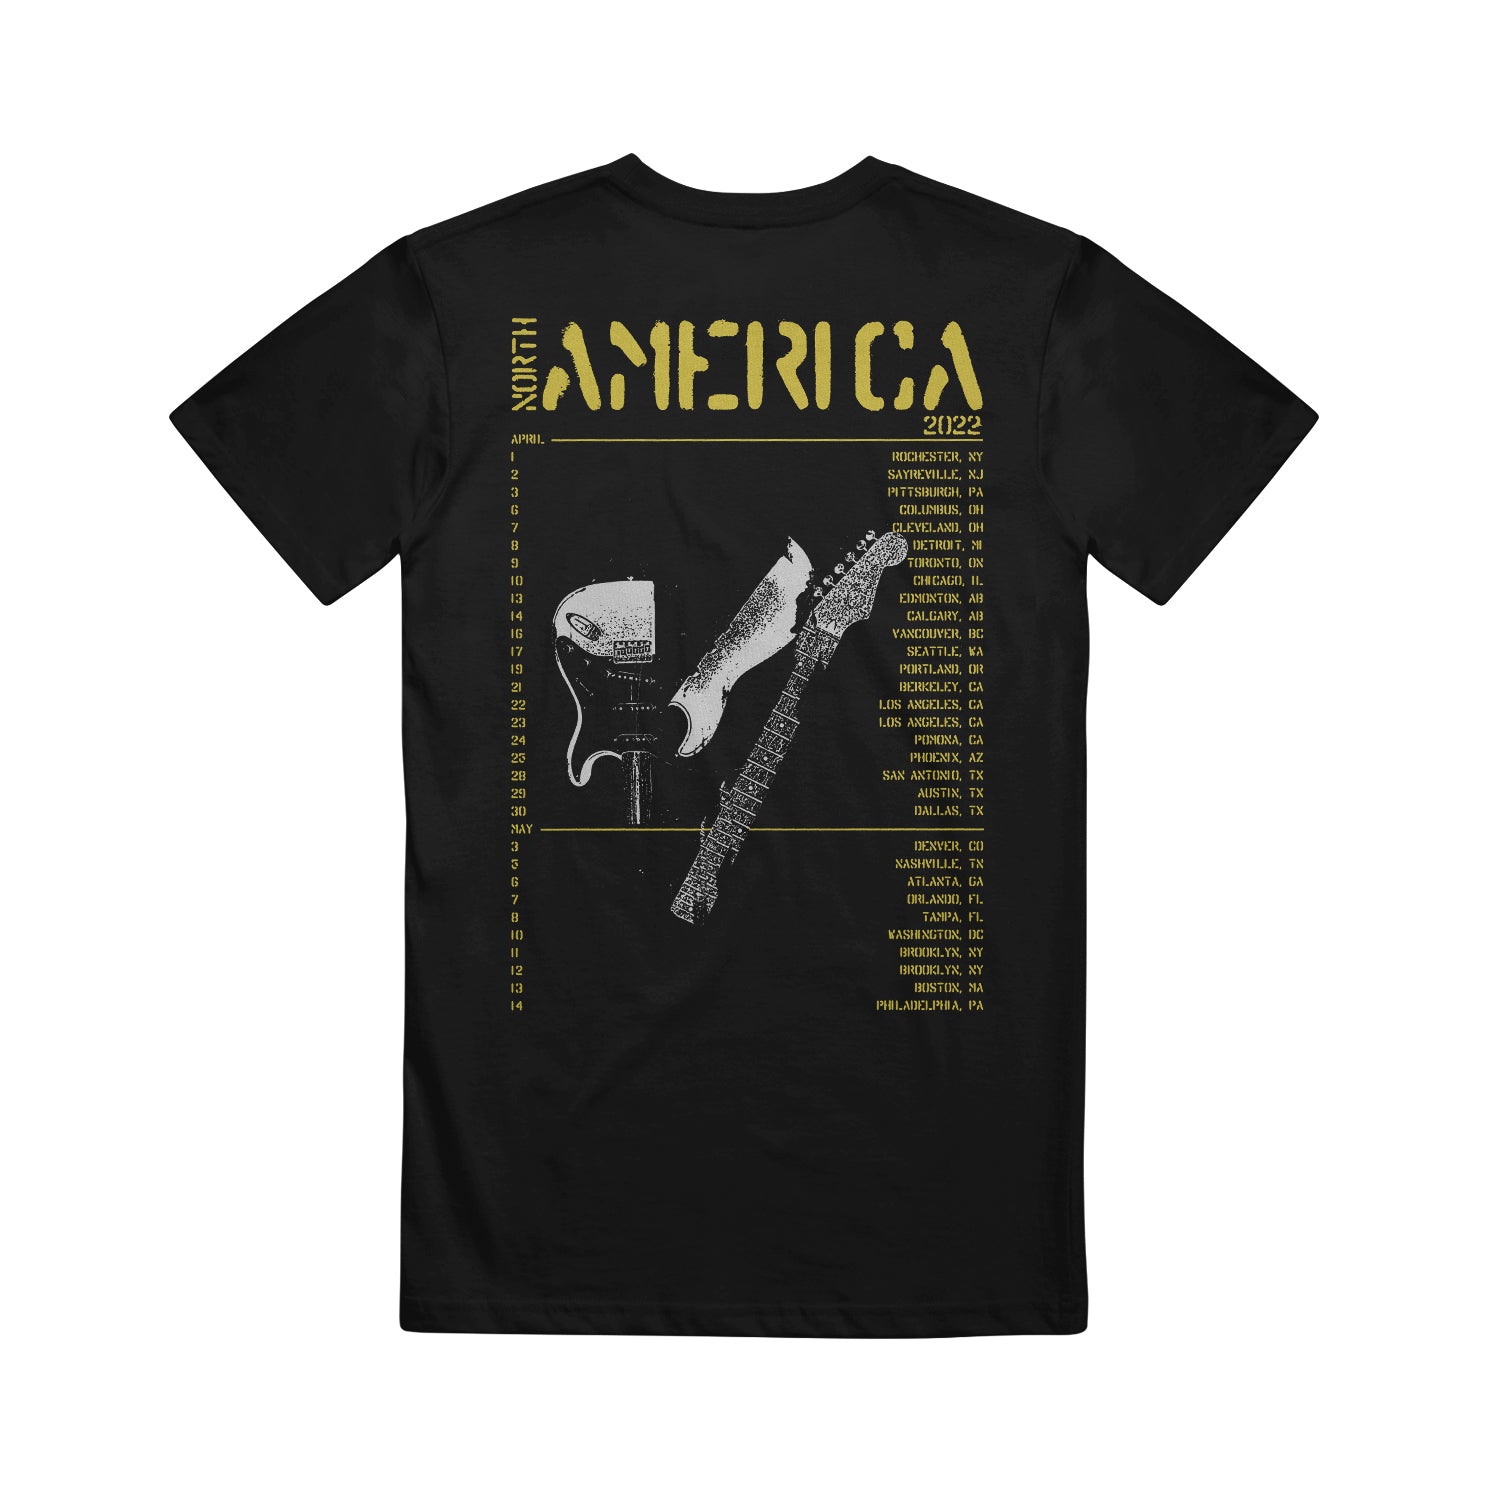 image of the back of a black tee shirt on a white background. the tee has in yellow at the top 2022 america with the list of tour dates and locations below and a broken guitar in the center.